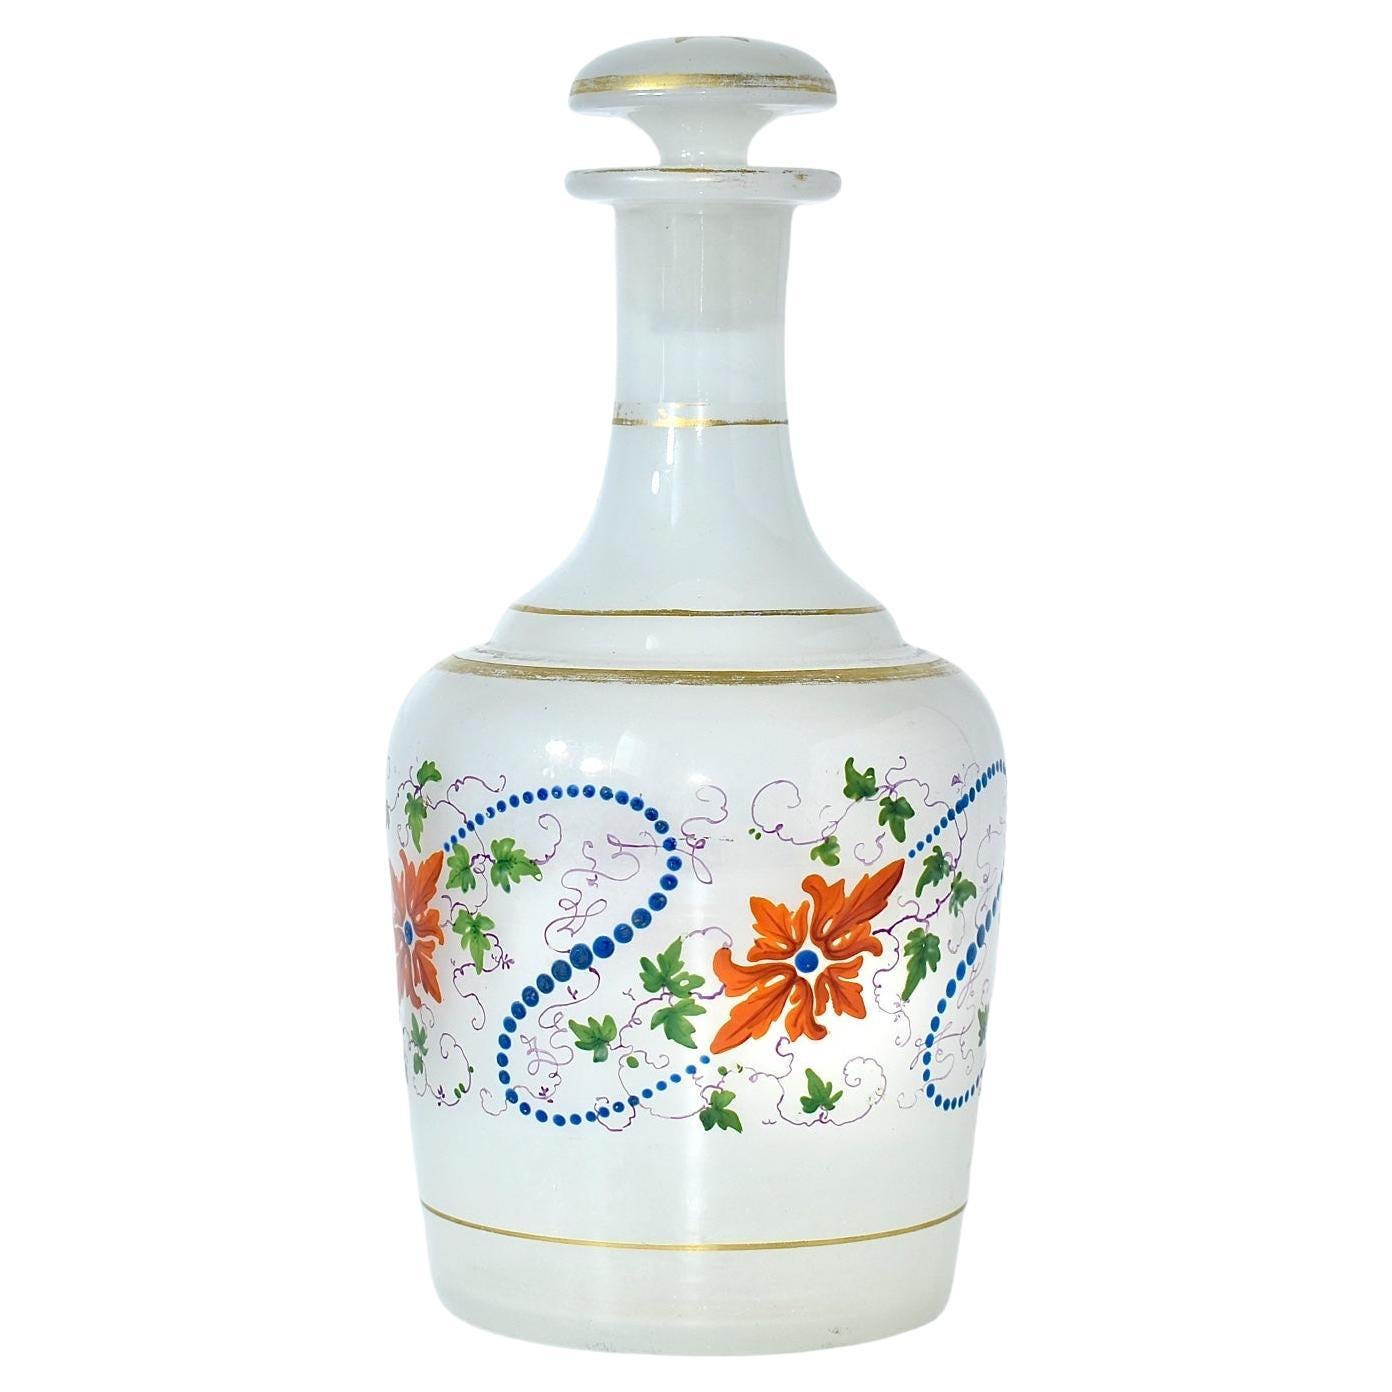 Opaline Glass Antique Moser Opaline Enameled Glass Bottle and Glass, 19th Century For Sale